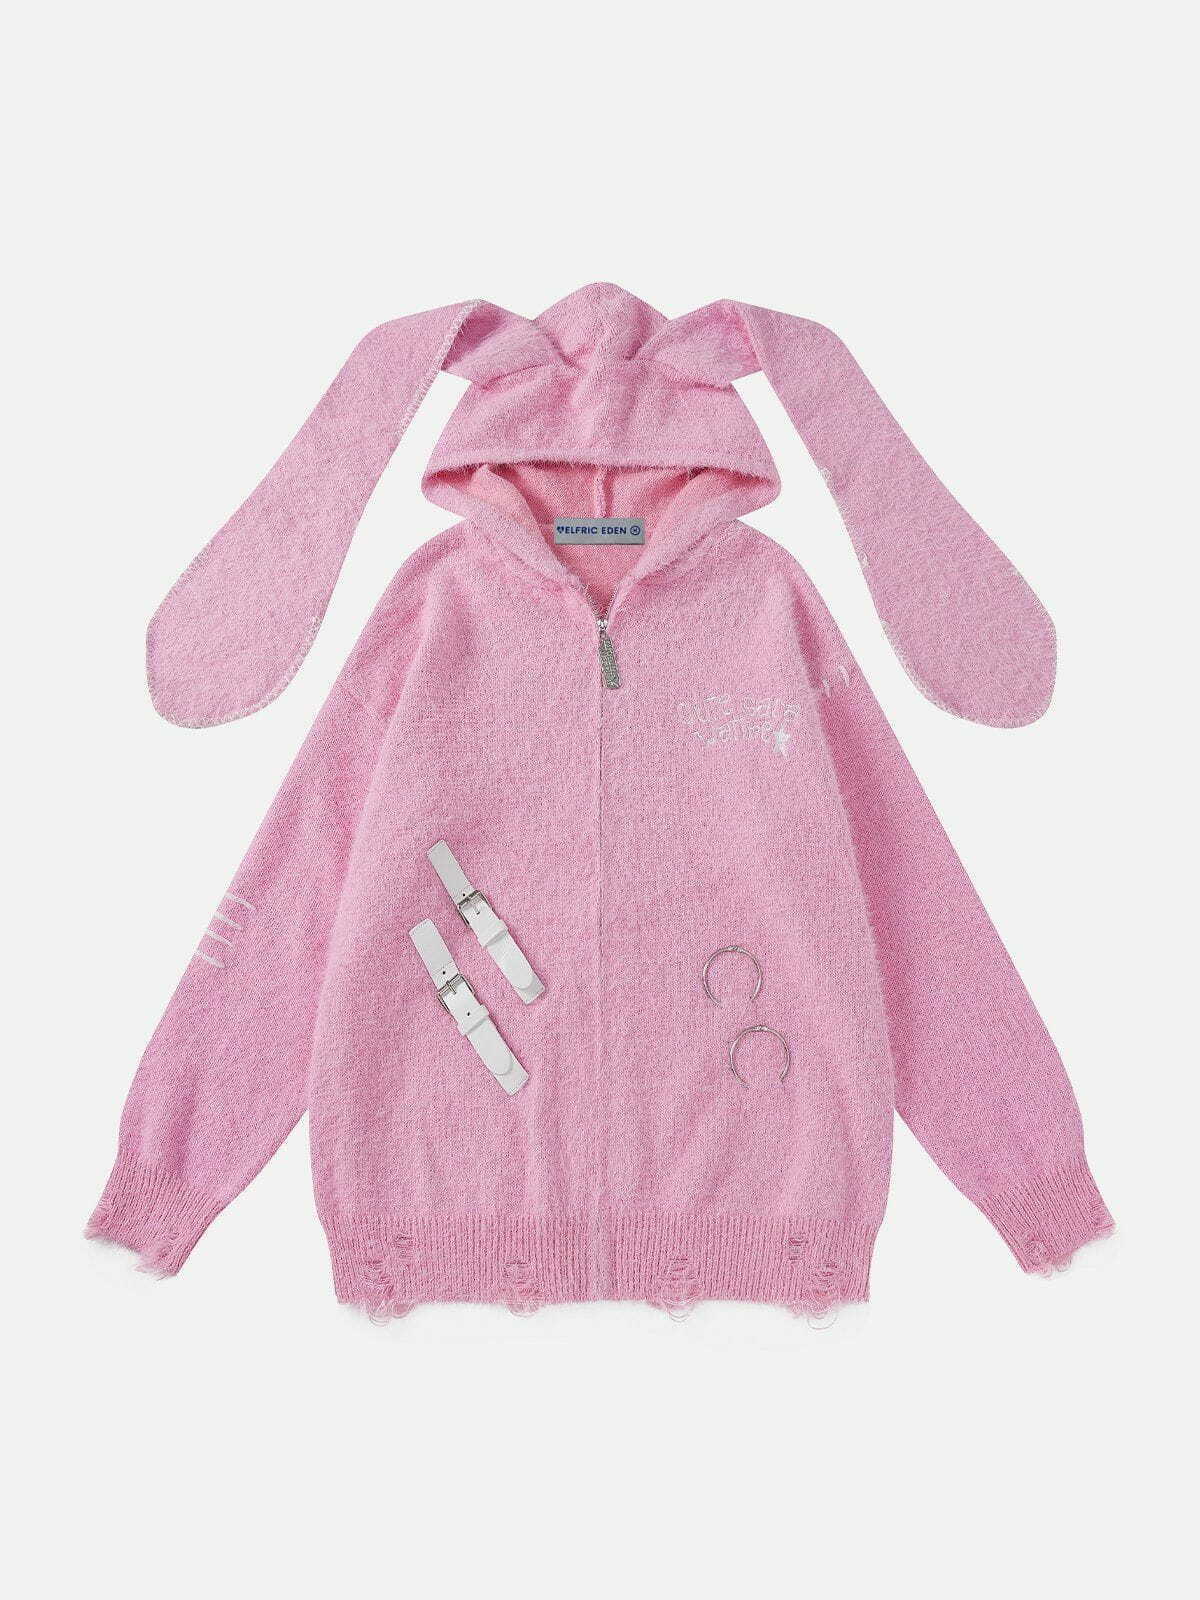 youthful rabbit ear hoodie distressed knit charm 1606